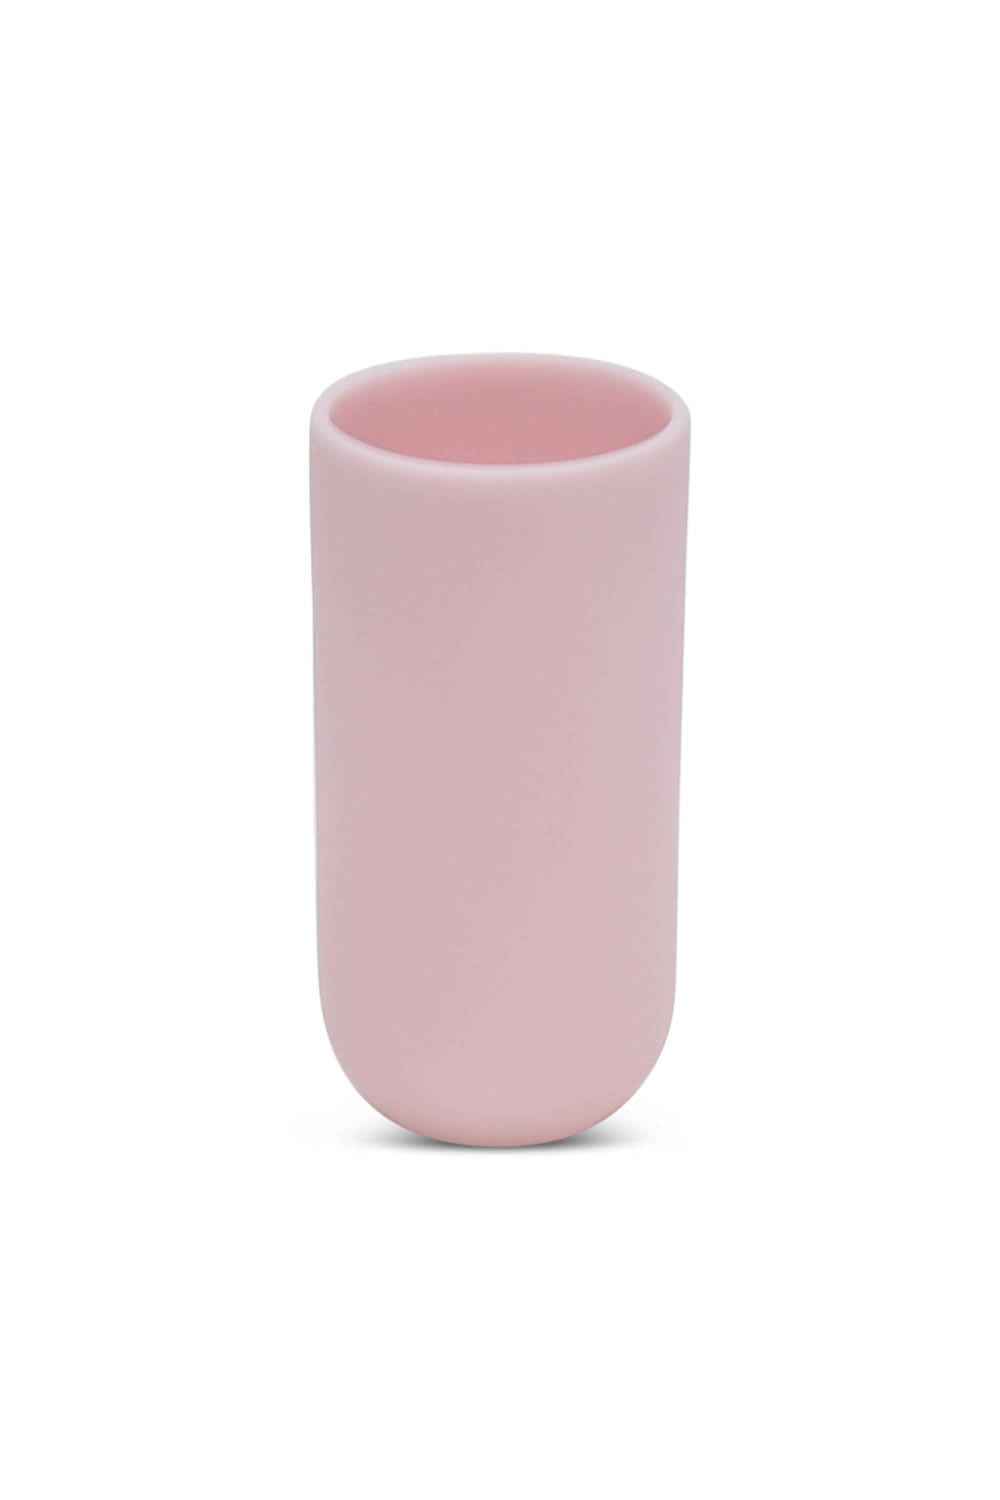 MODERN Tall Cup in Pale Rose